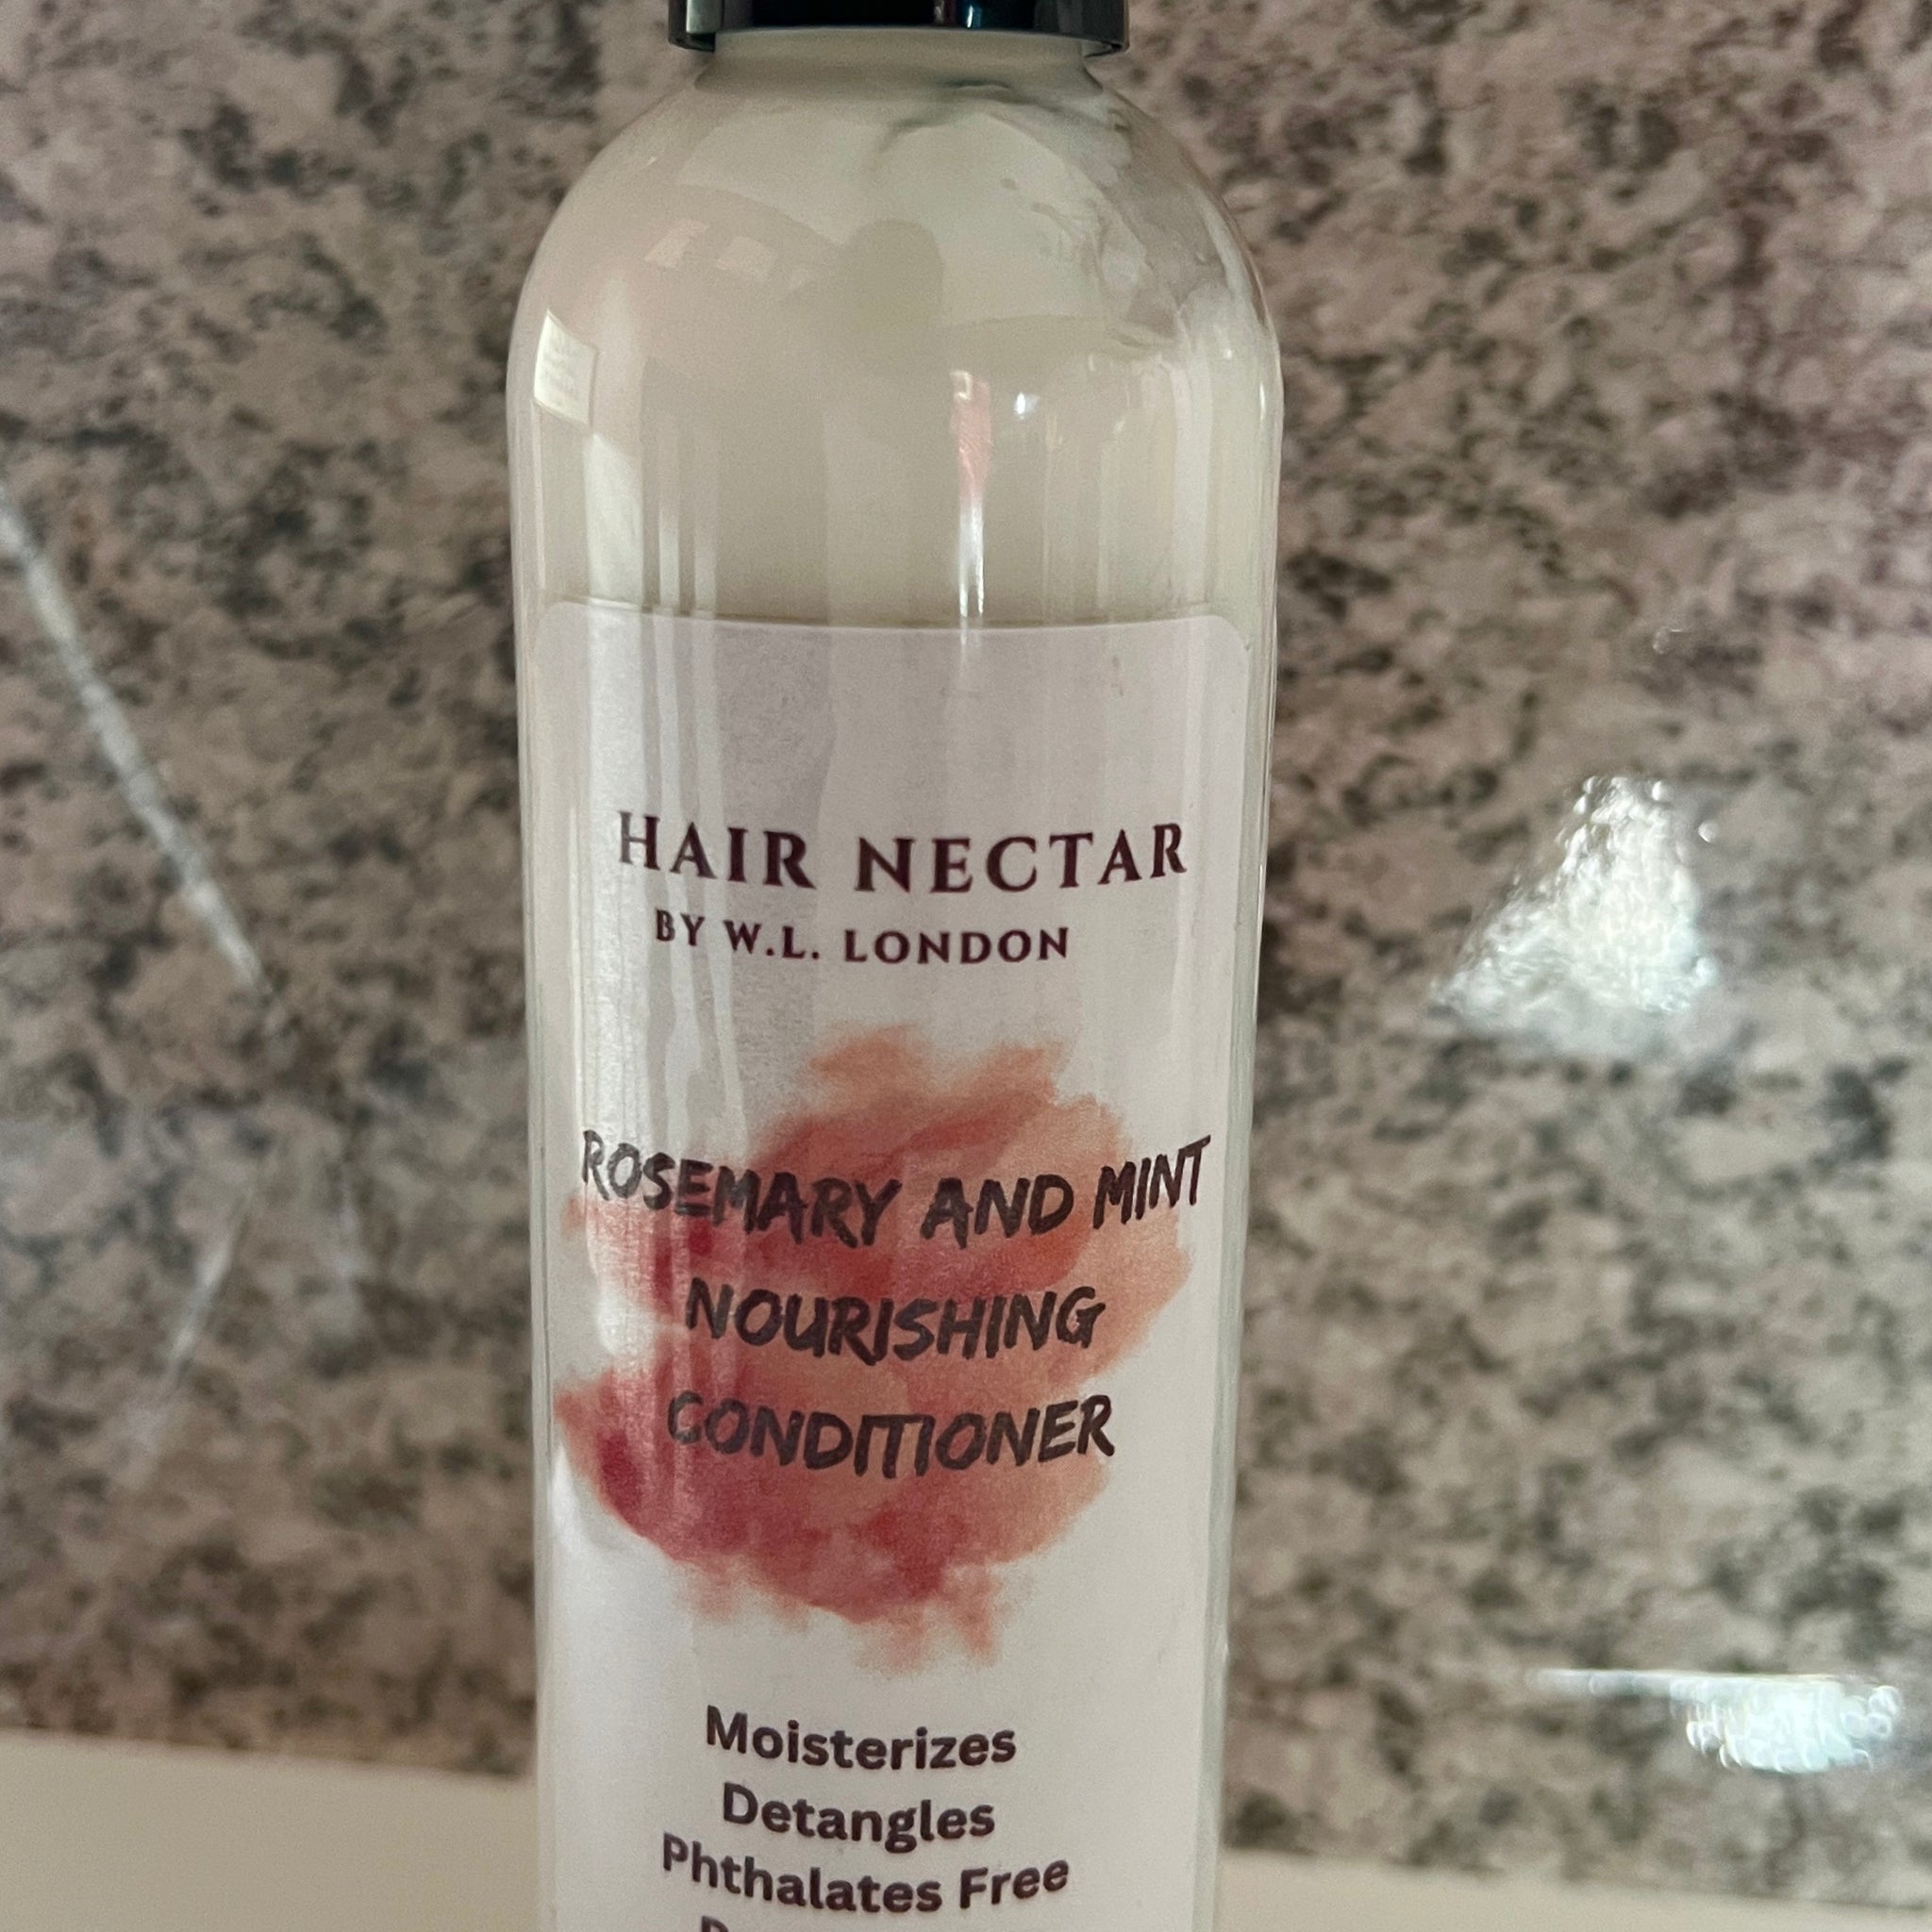 Rosemary and Mint Nourishing Conditioner